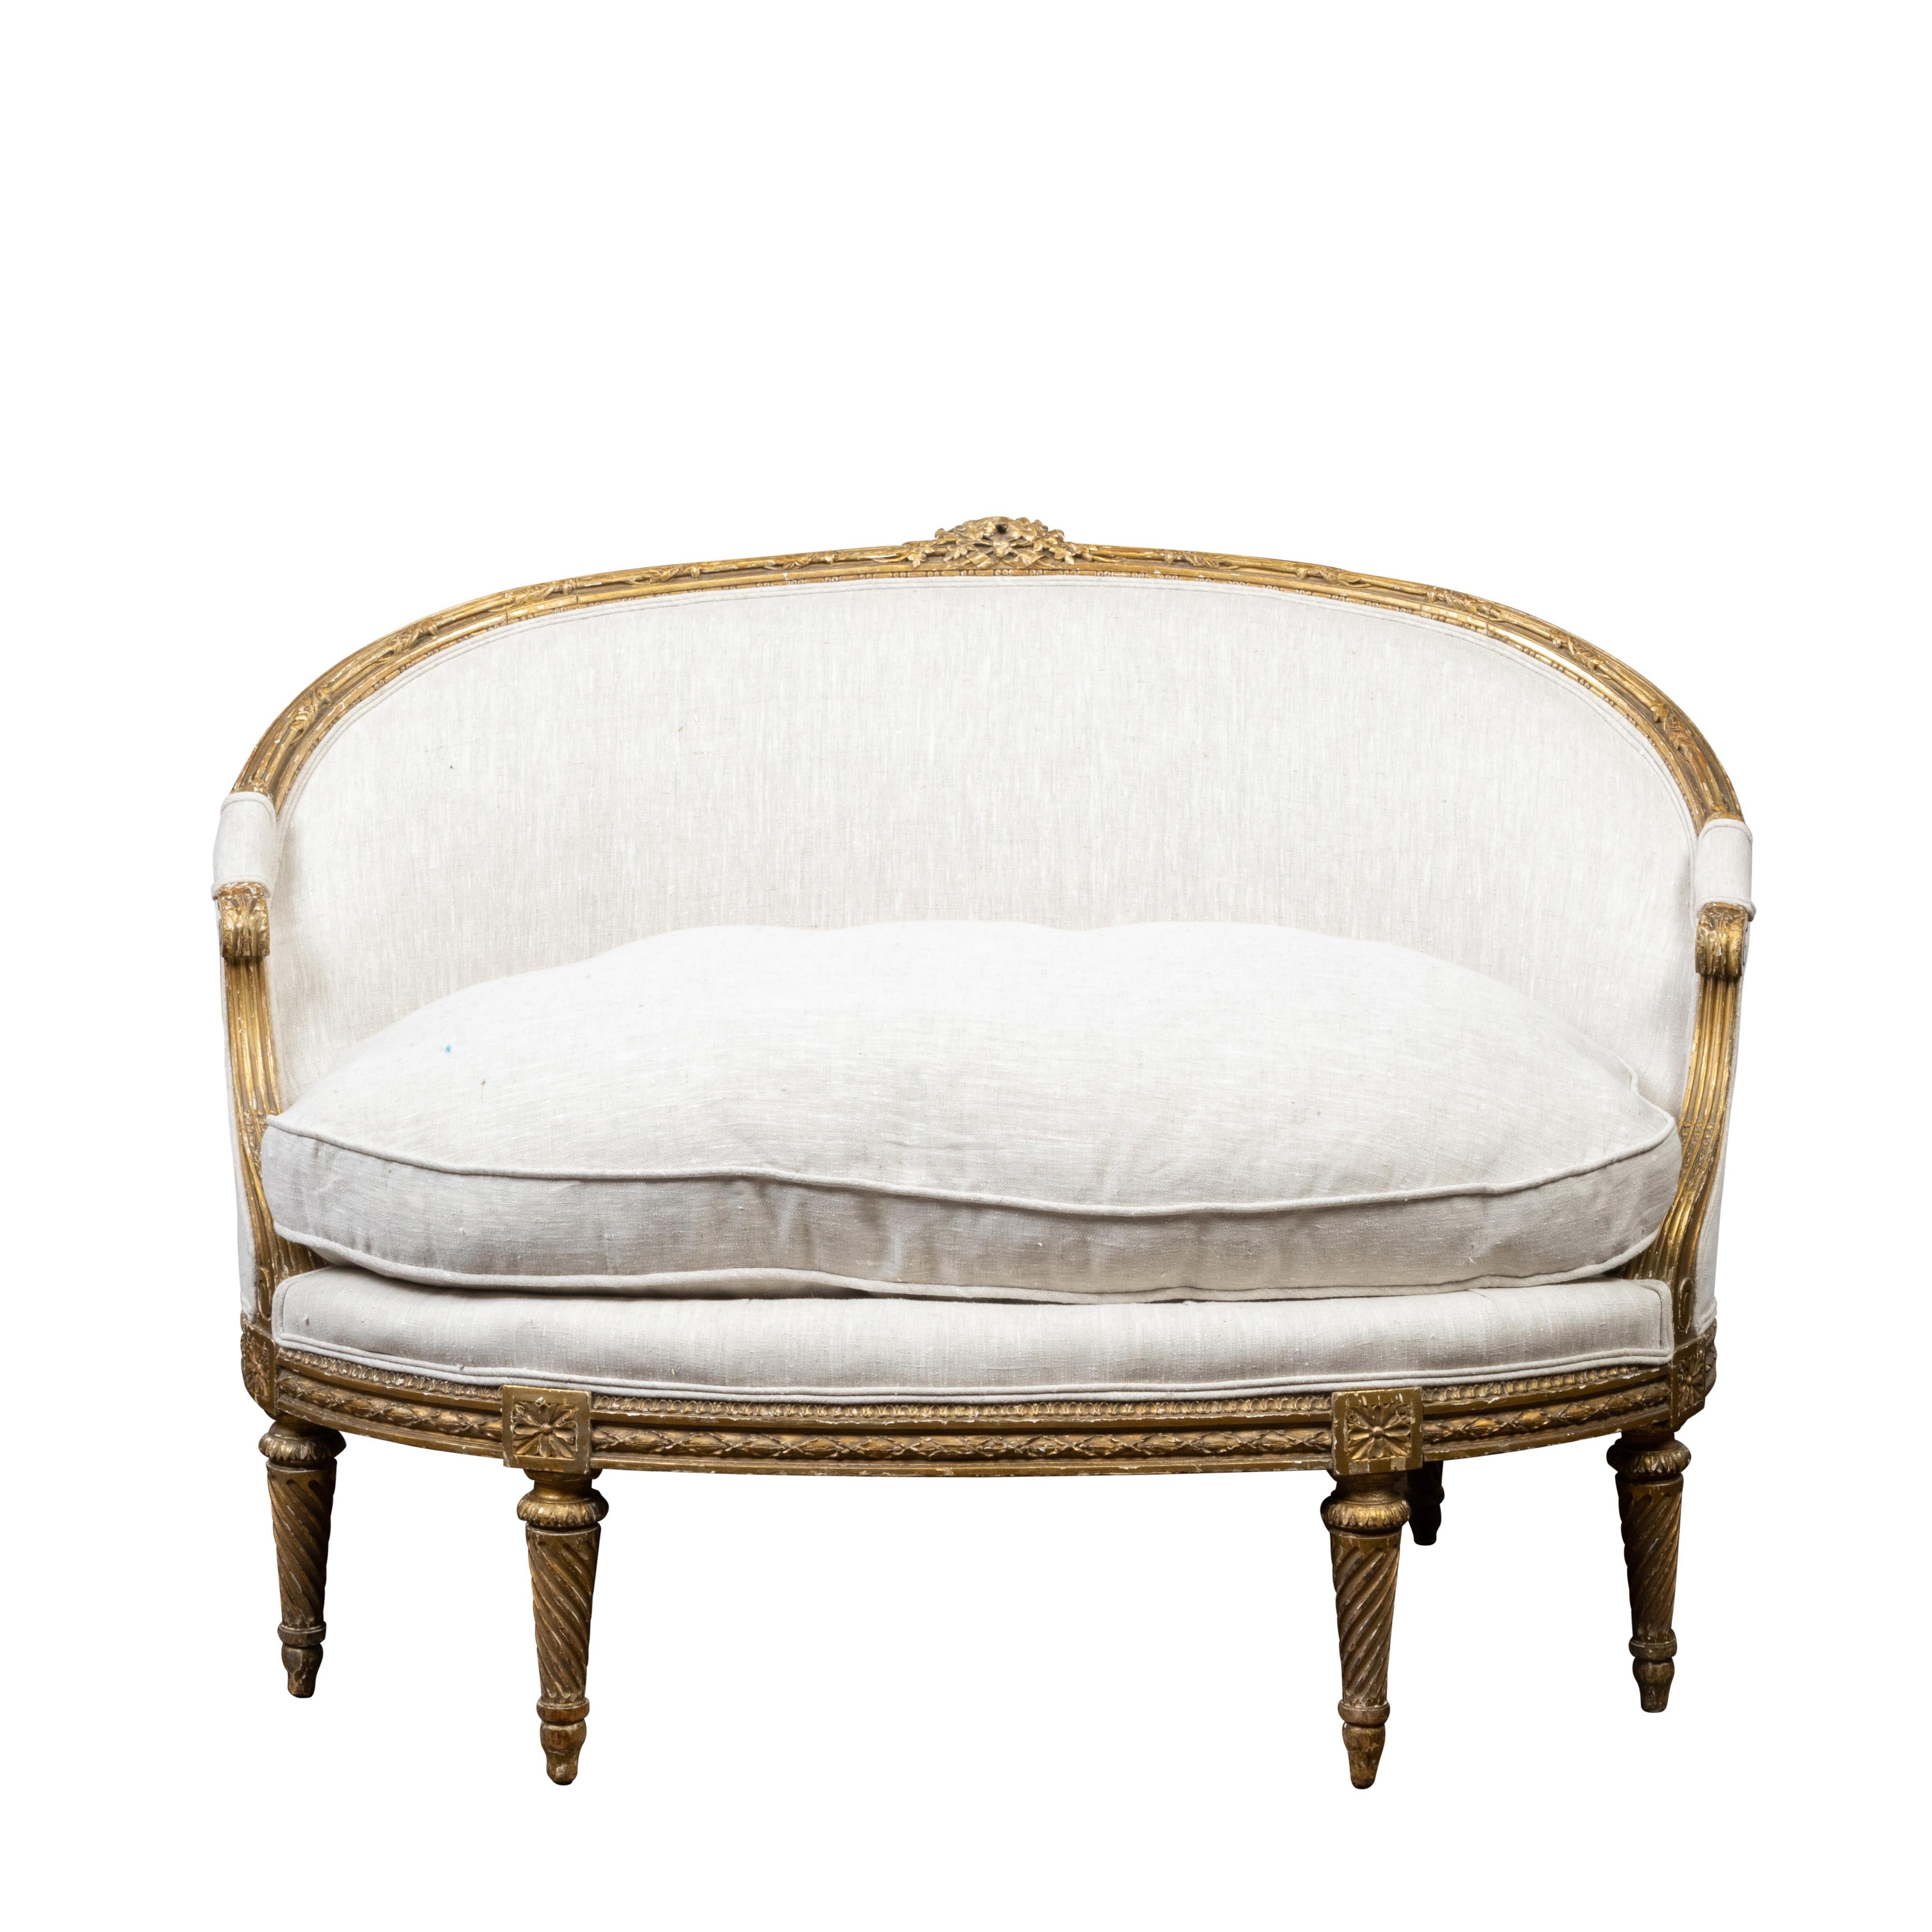 French Louis XVI Style 19th Century Giltwood Upholstered Canapé en Corbeille For Sale